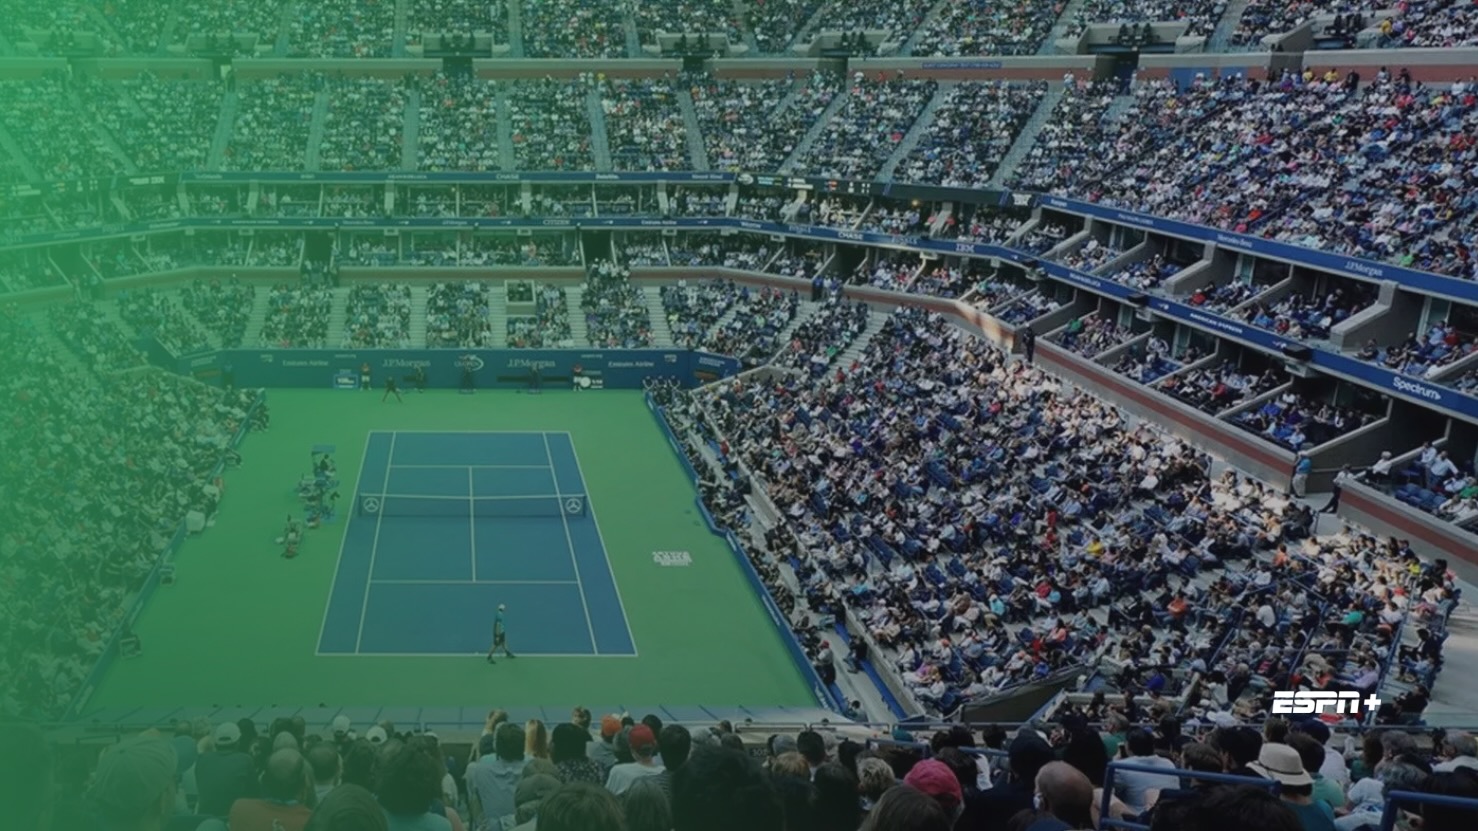 us open tennis where to watch